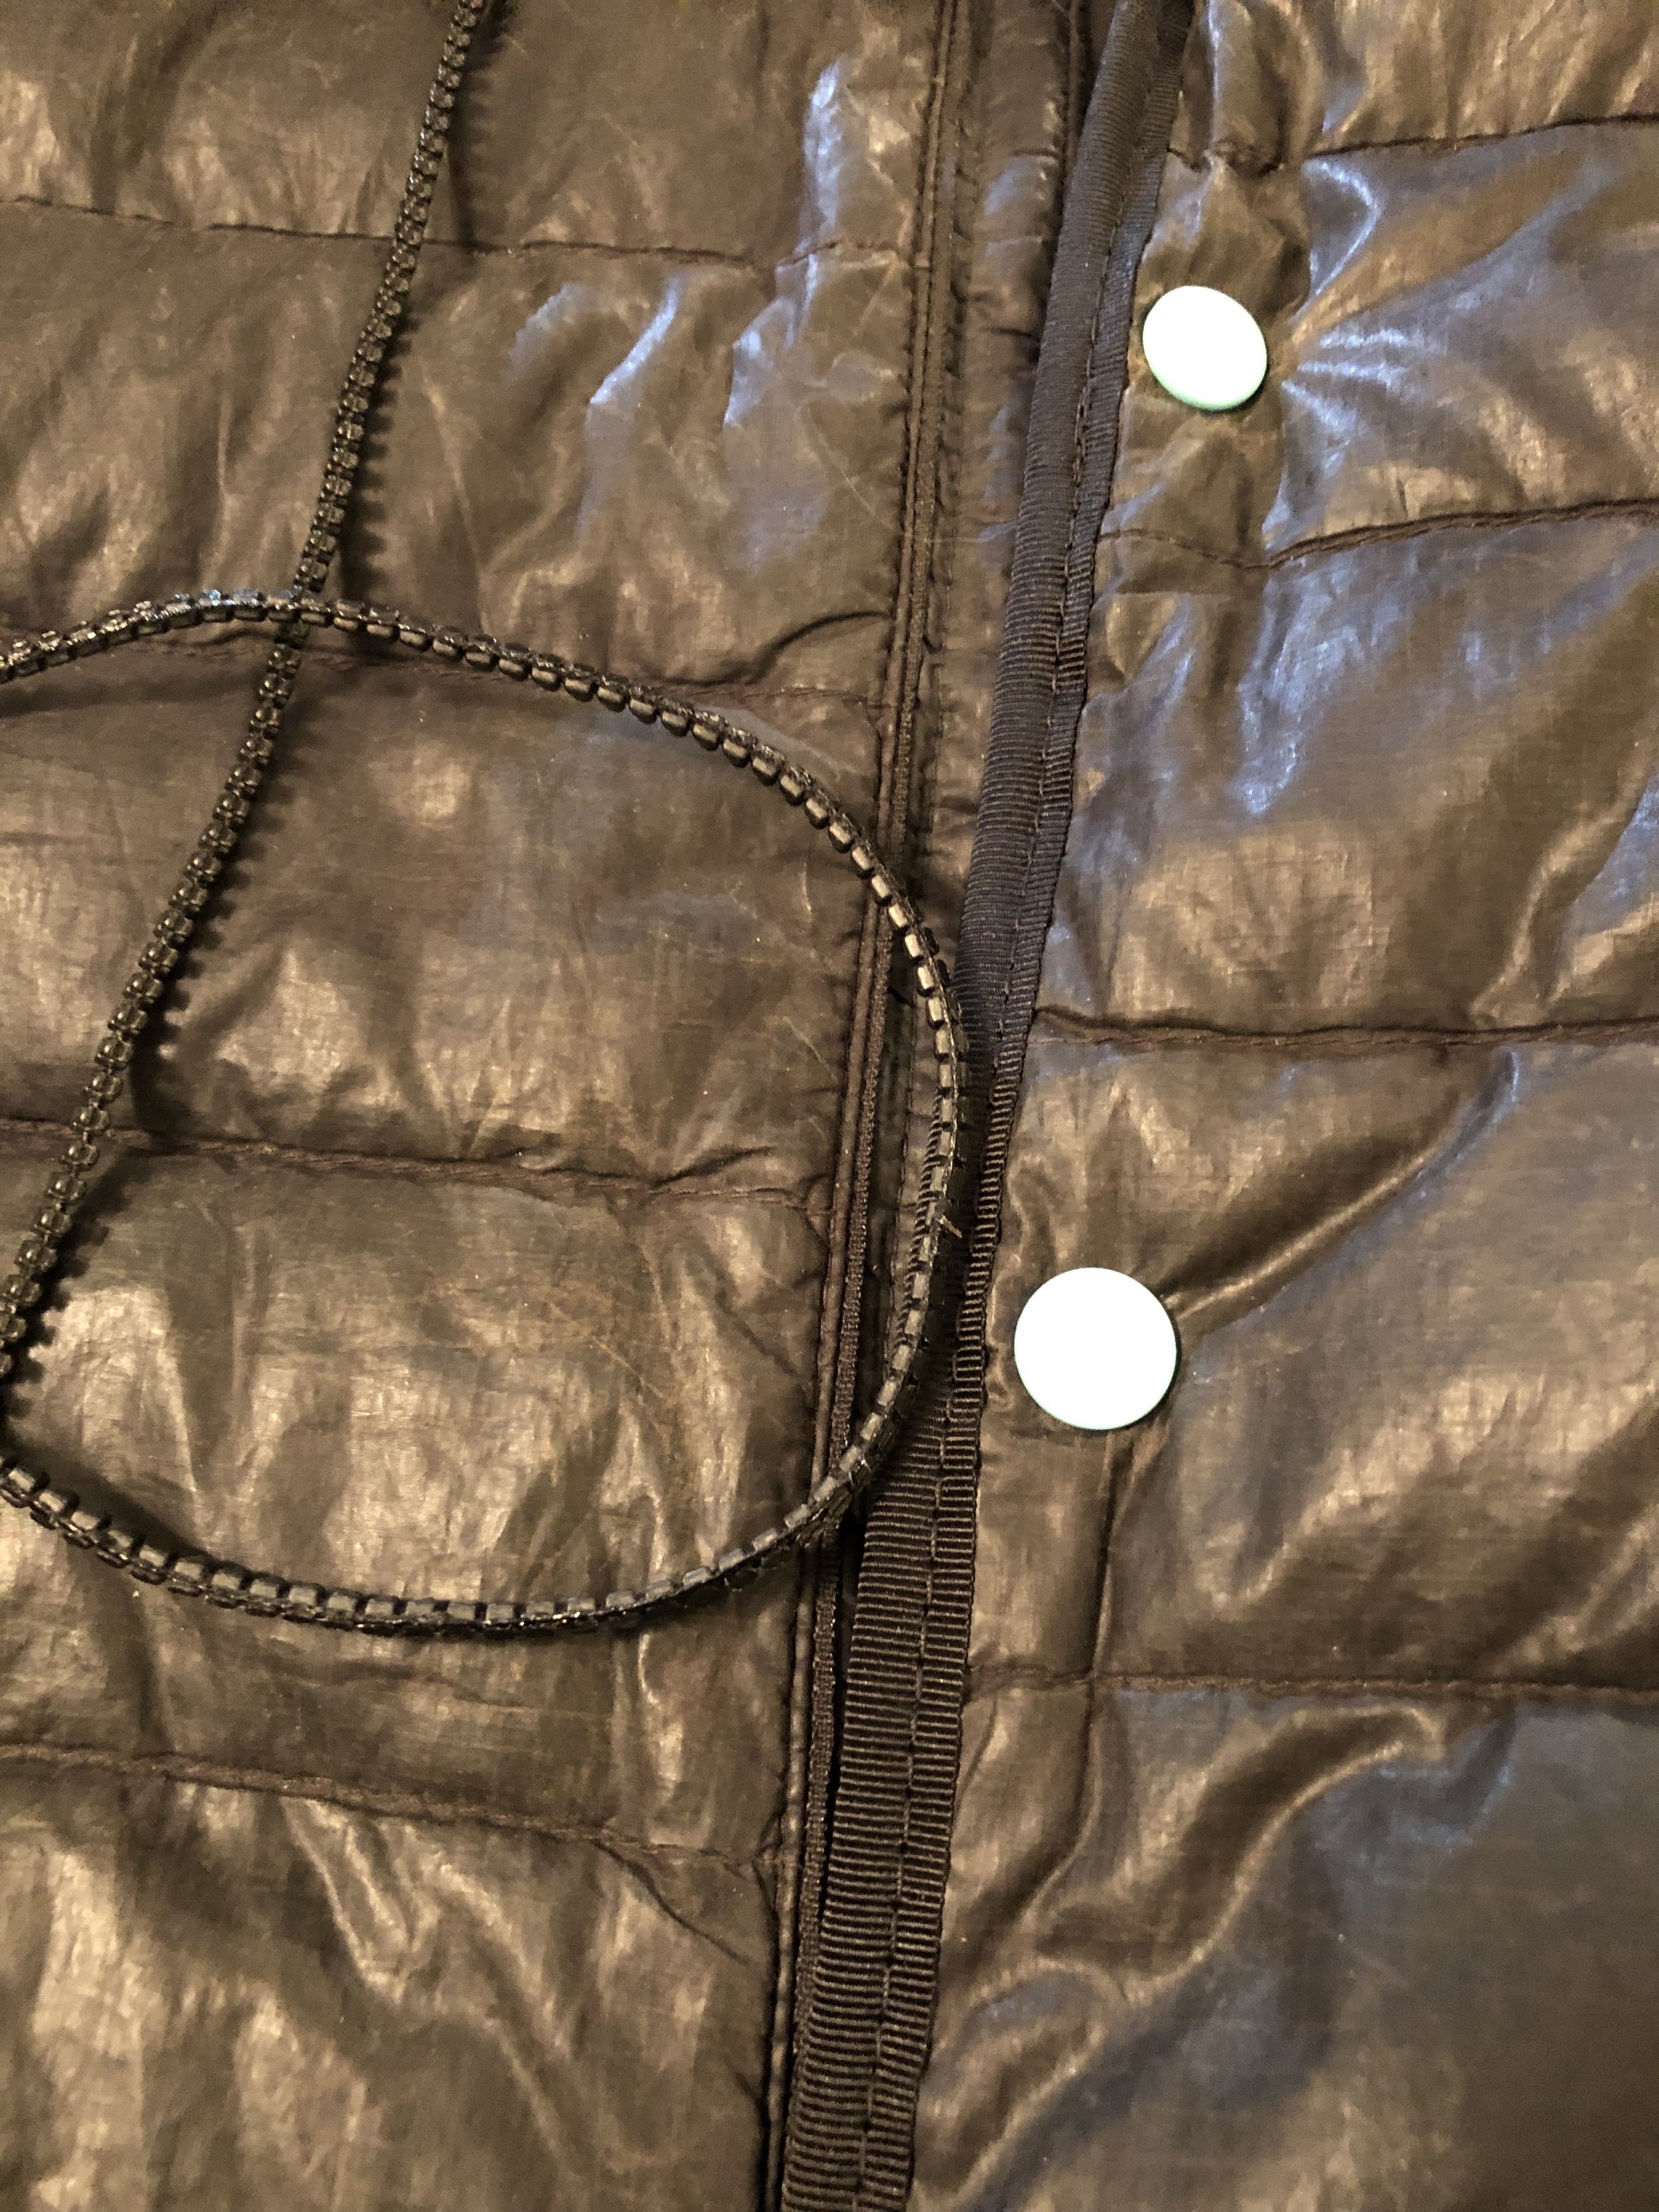 How to Fix a Zipper on a Jacket - Quick and Easy 